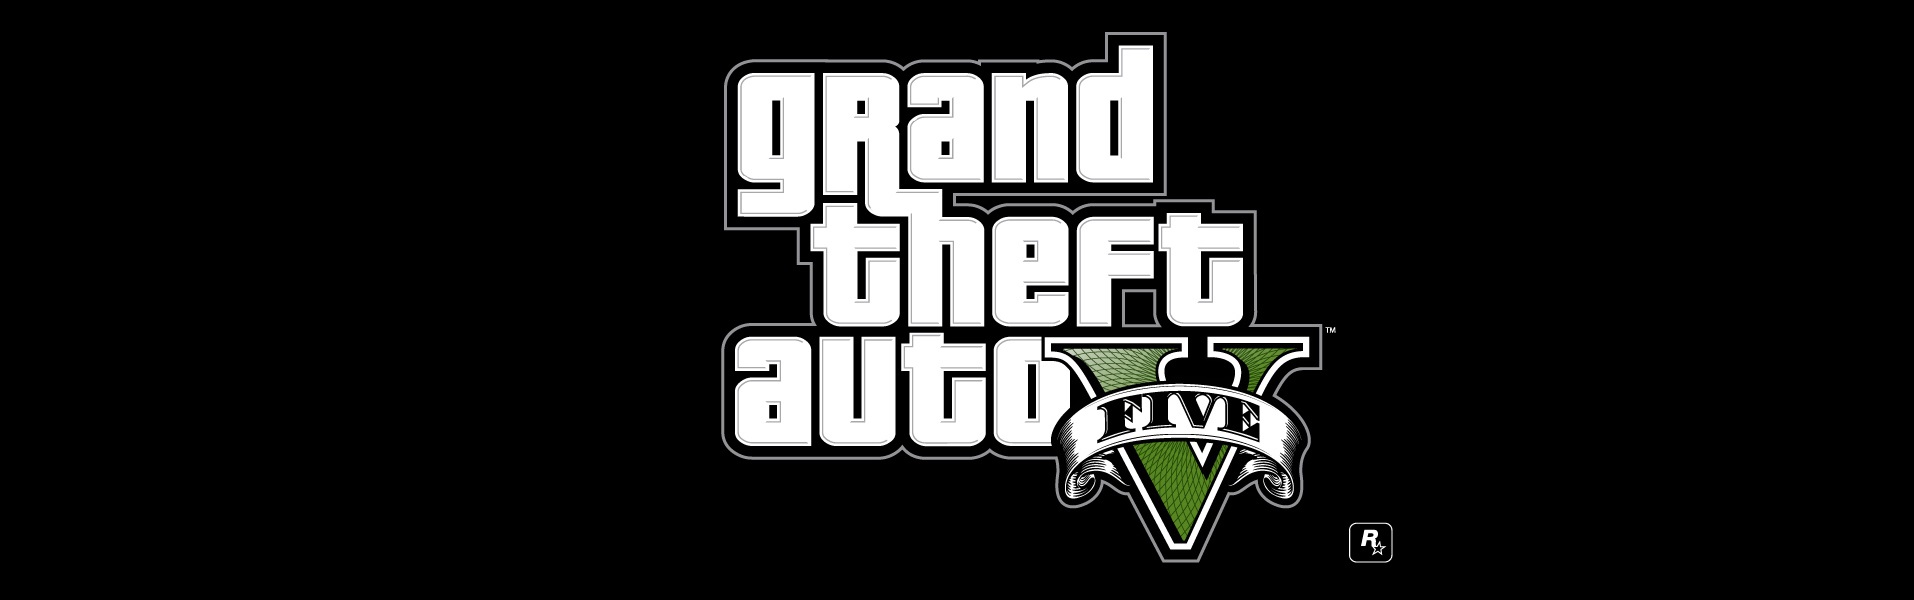 Grand Theft Auto V for PC System Specs Release Soon - CyberPowerPC